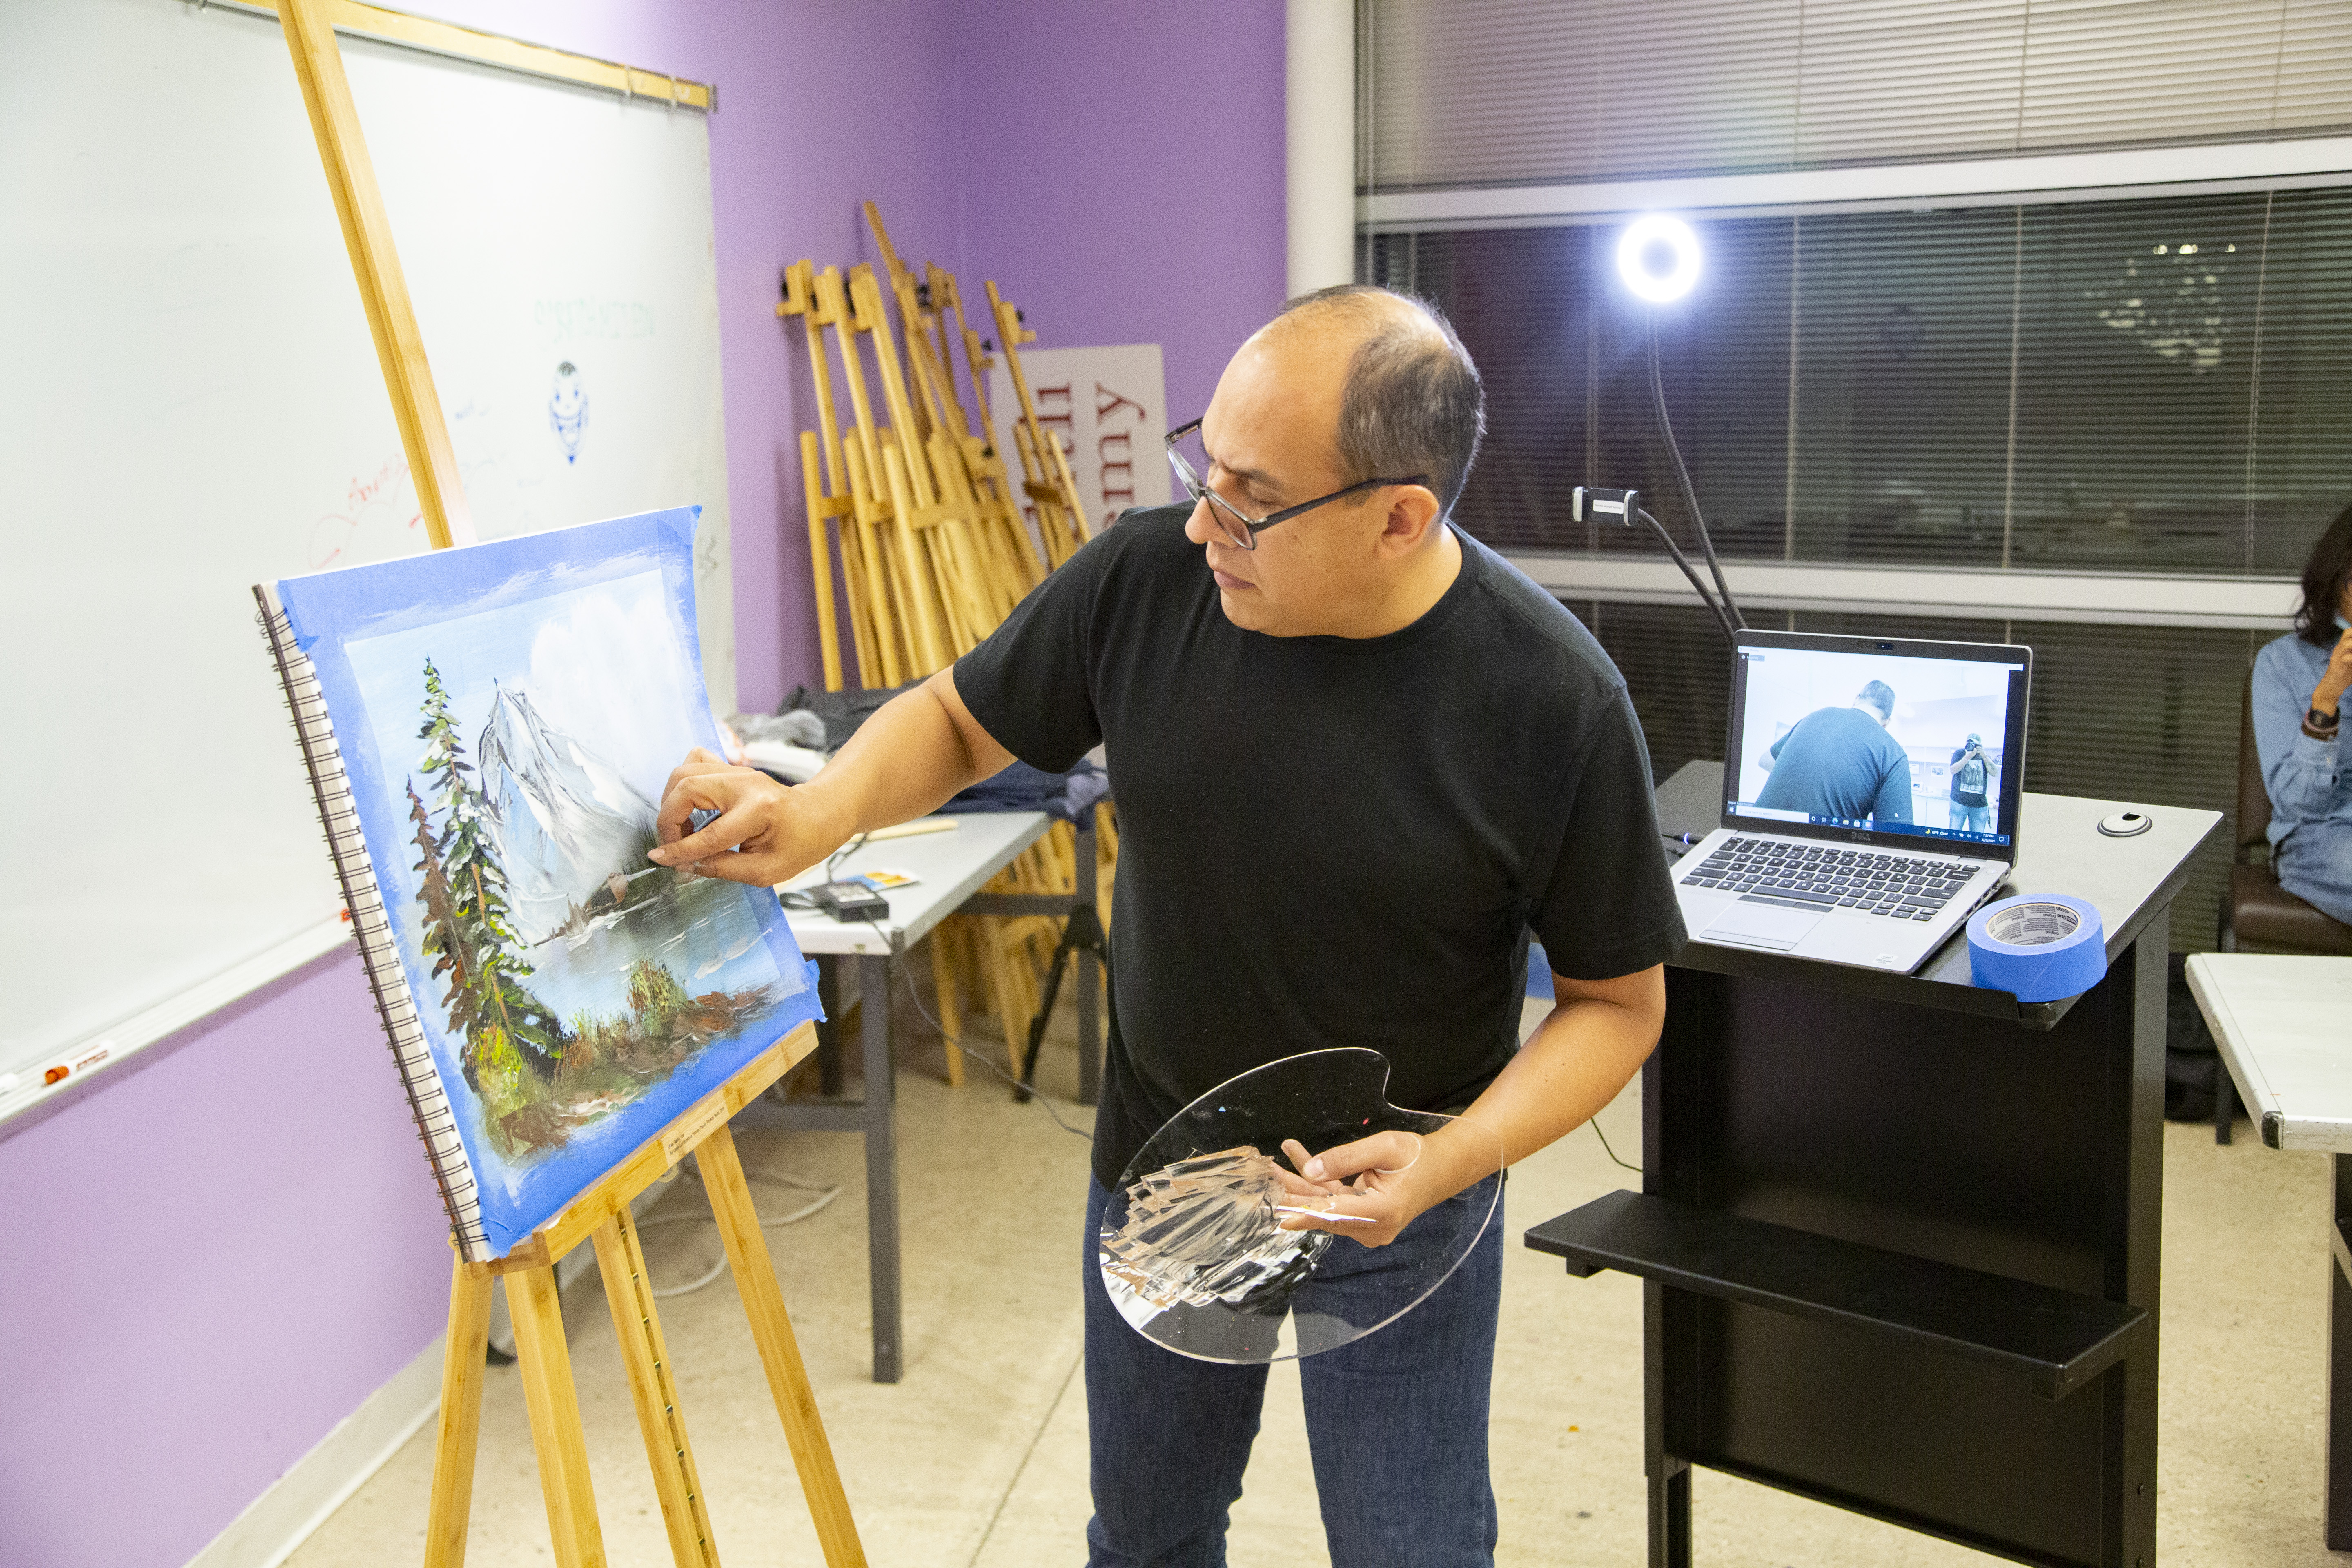 Instructor Miguel Angel Santana during a painting lesson in the Raul Salinas Room at the MACC